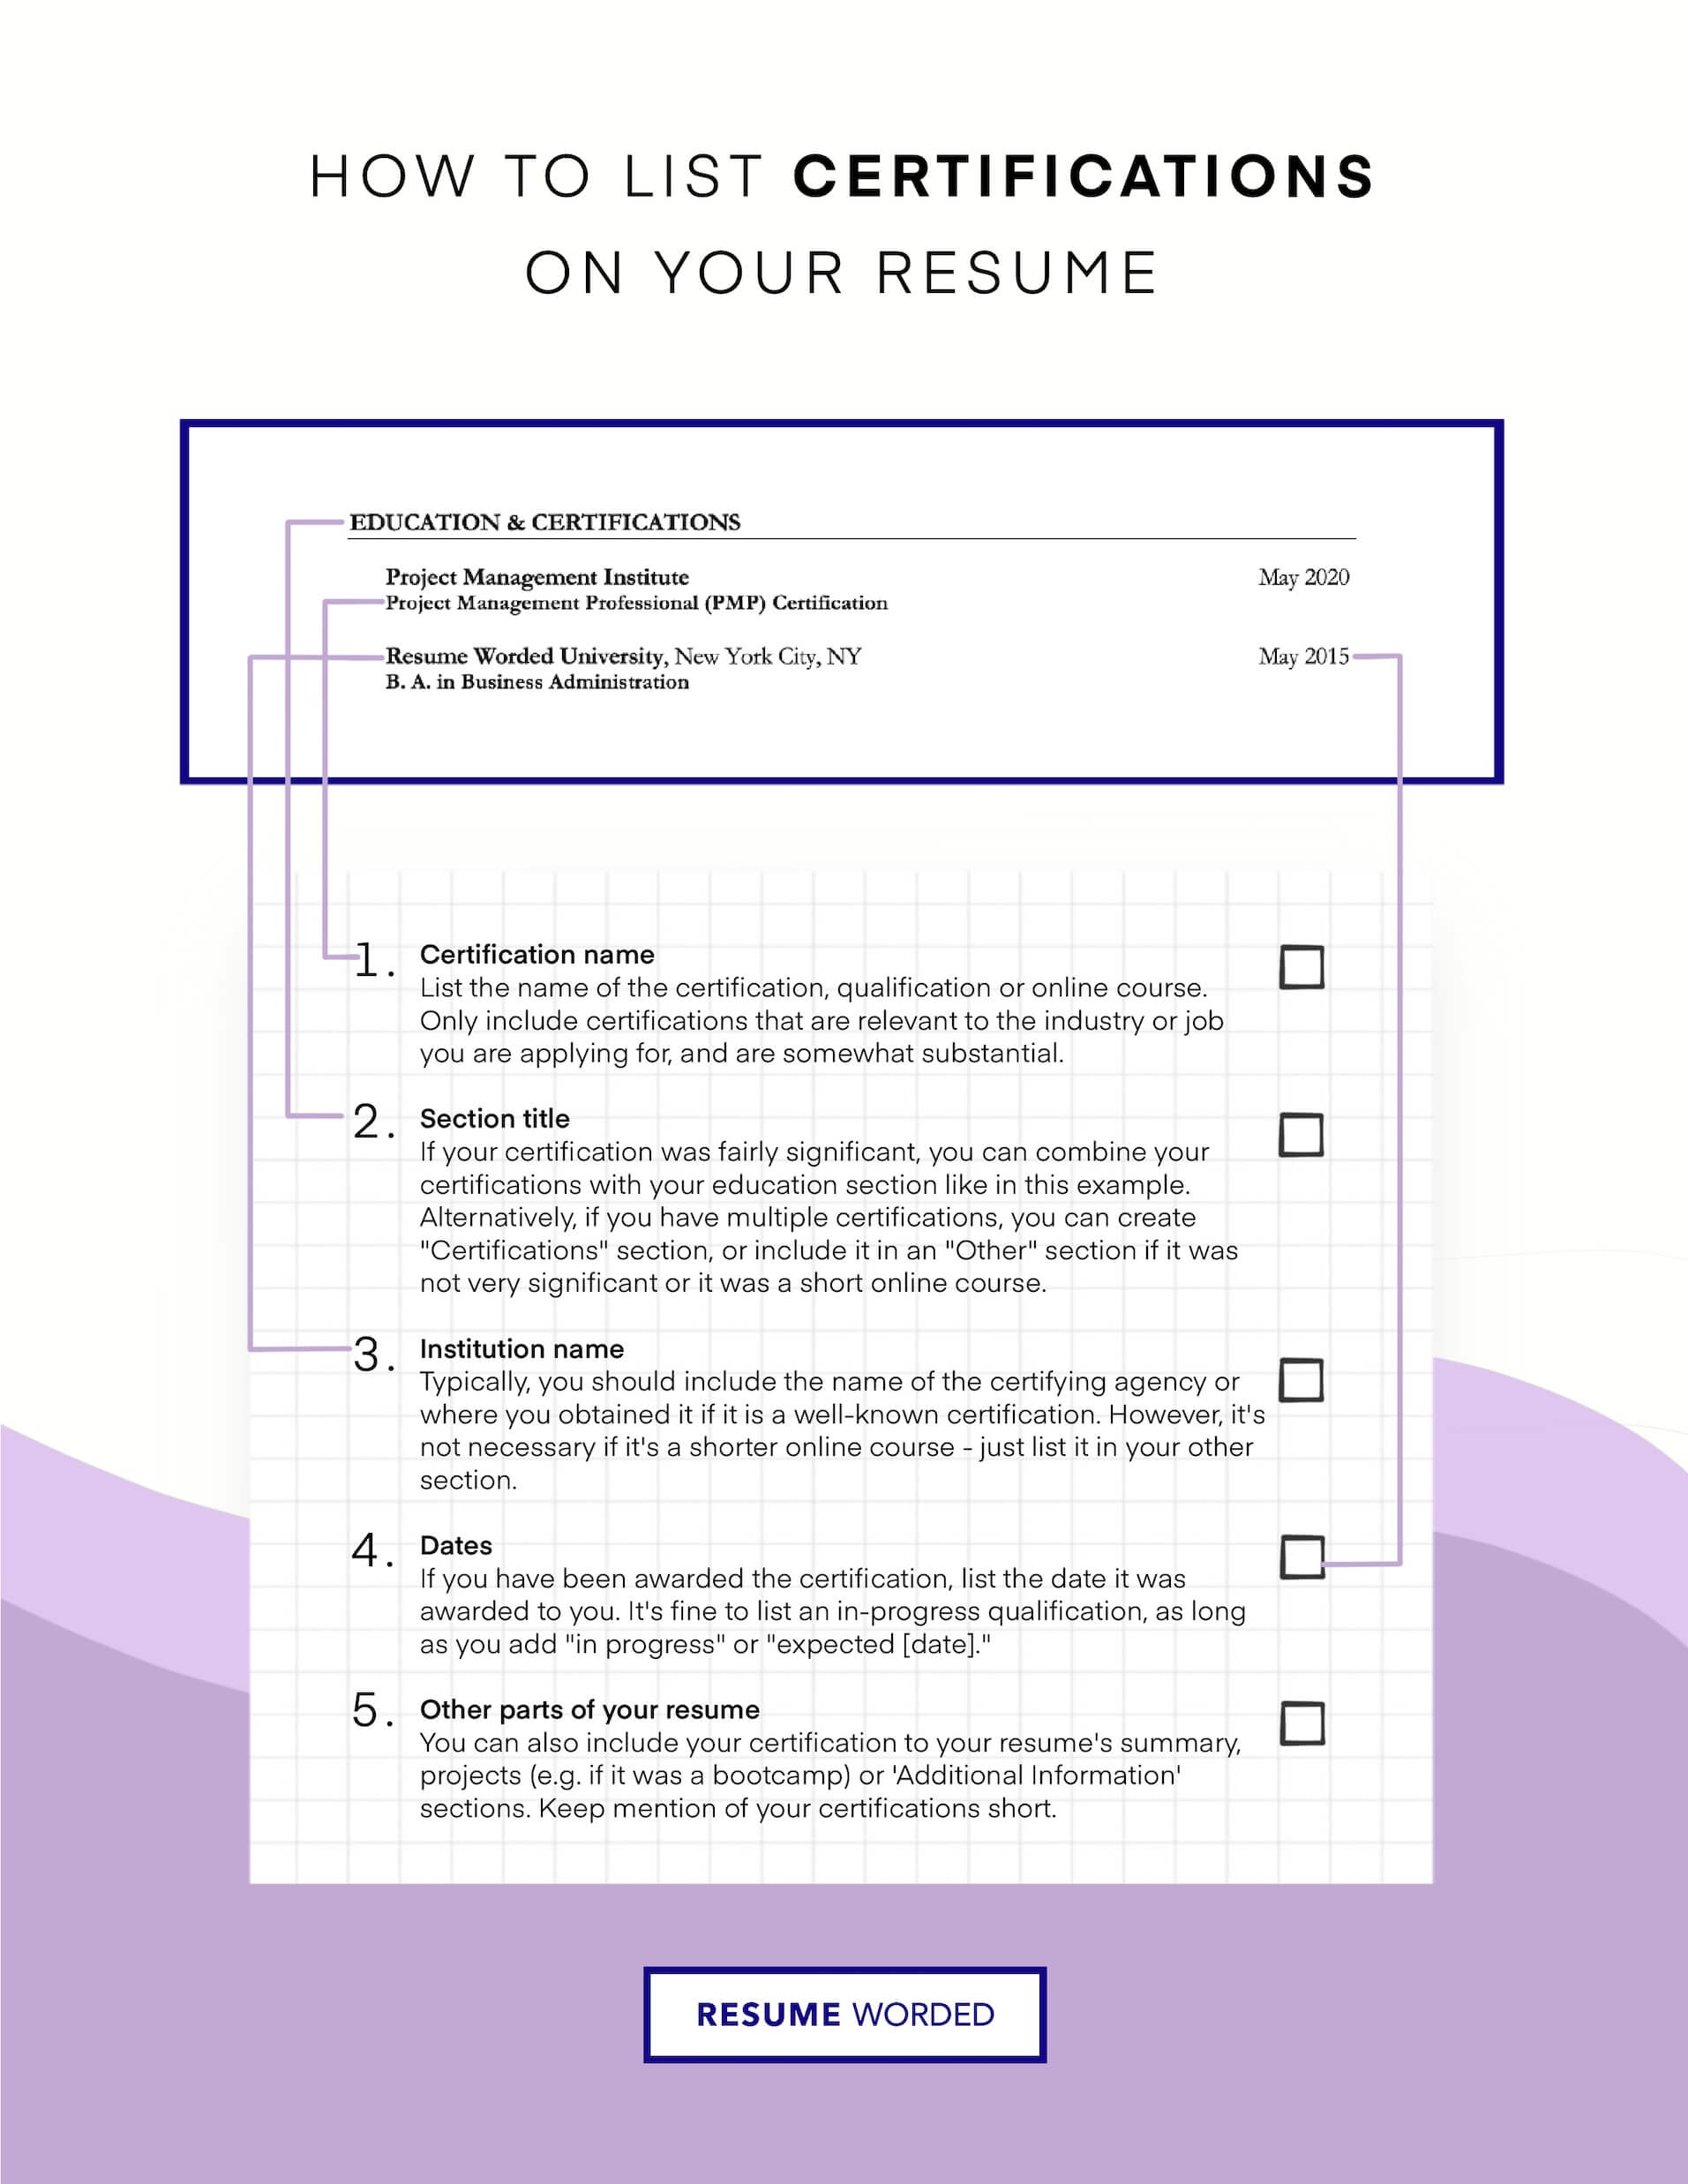 Gain HR certification. - Vice President of Human Resources Resume